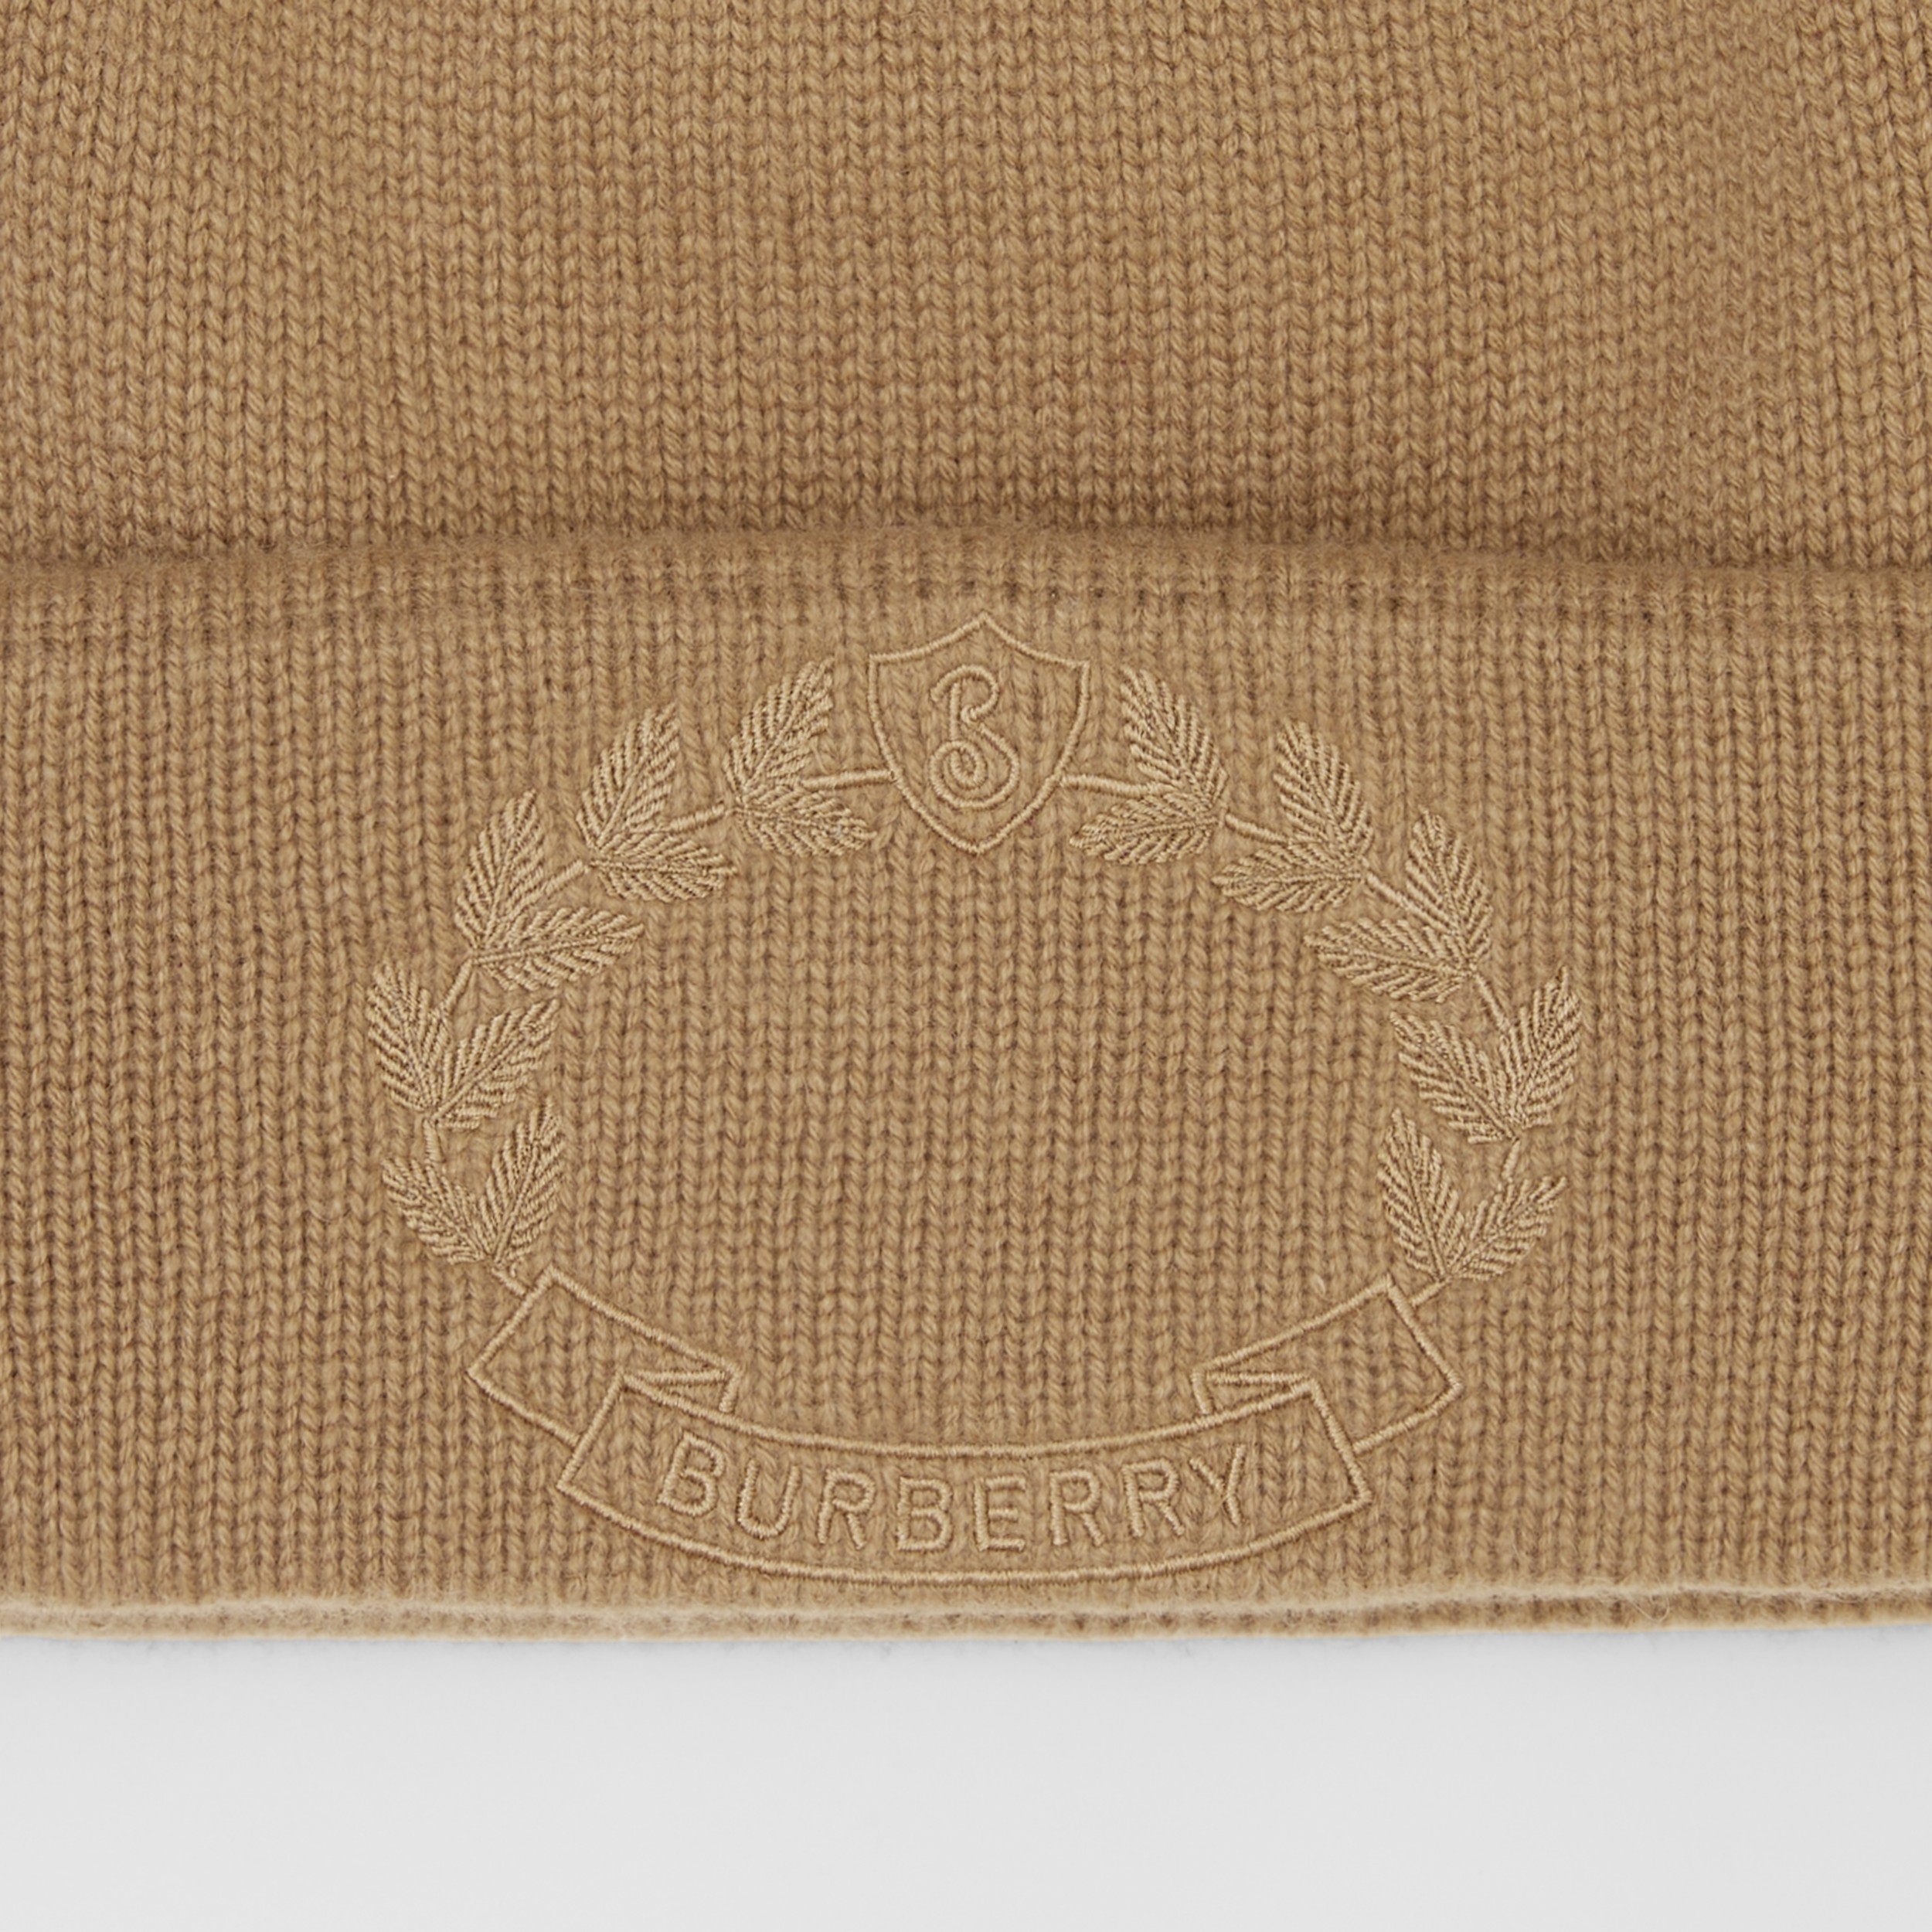 Oak Leaf Crest Cashmere Beanie in Camel | Burberry® Official